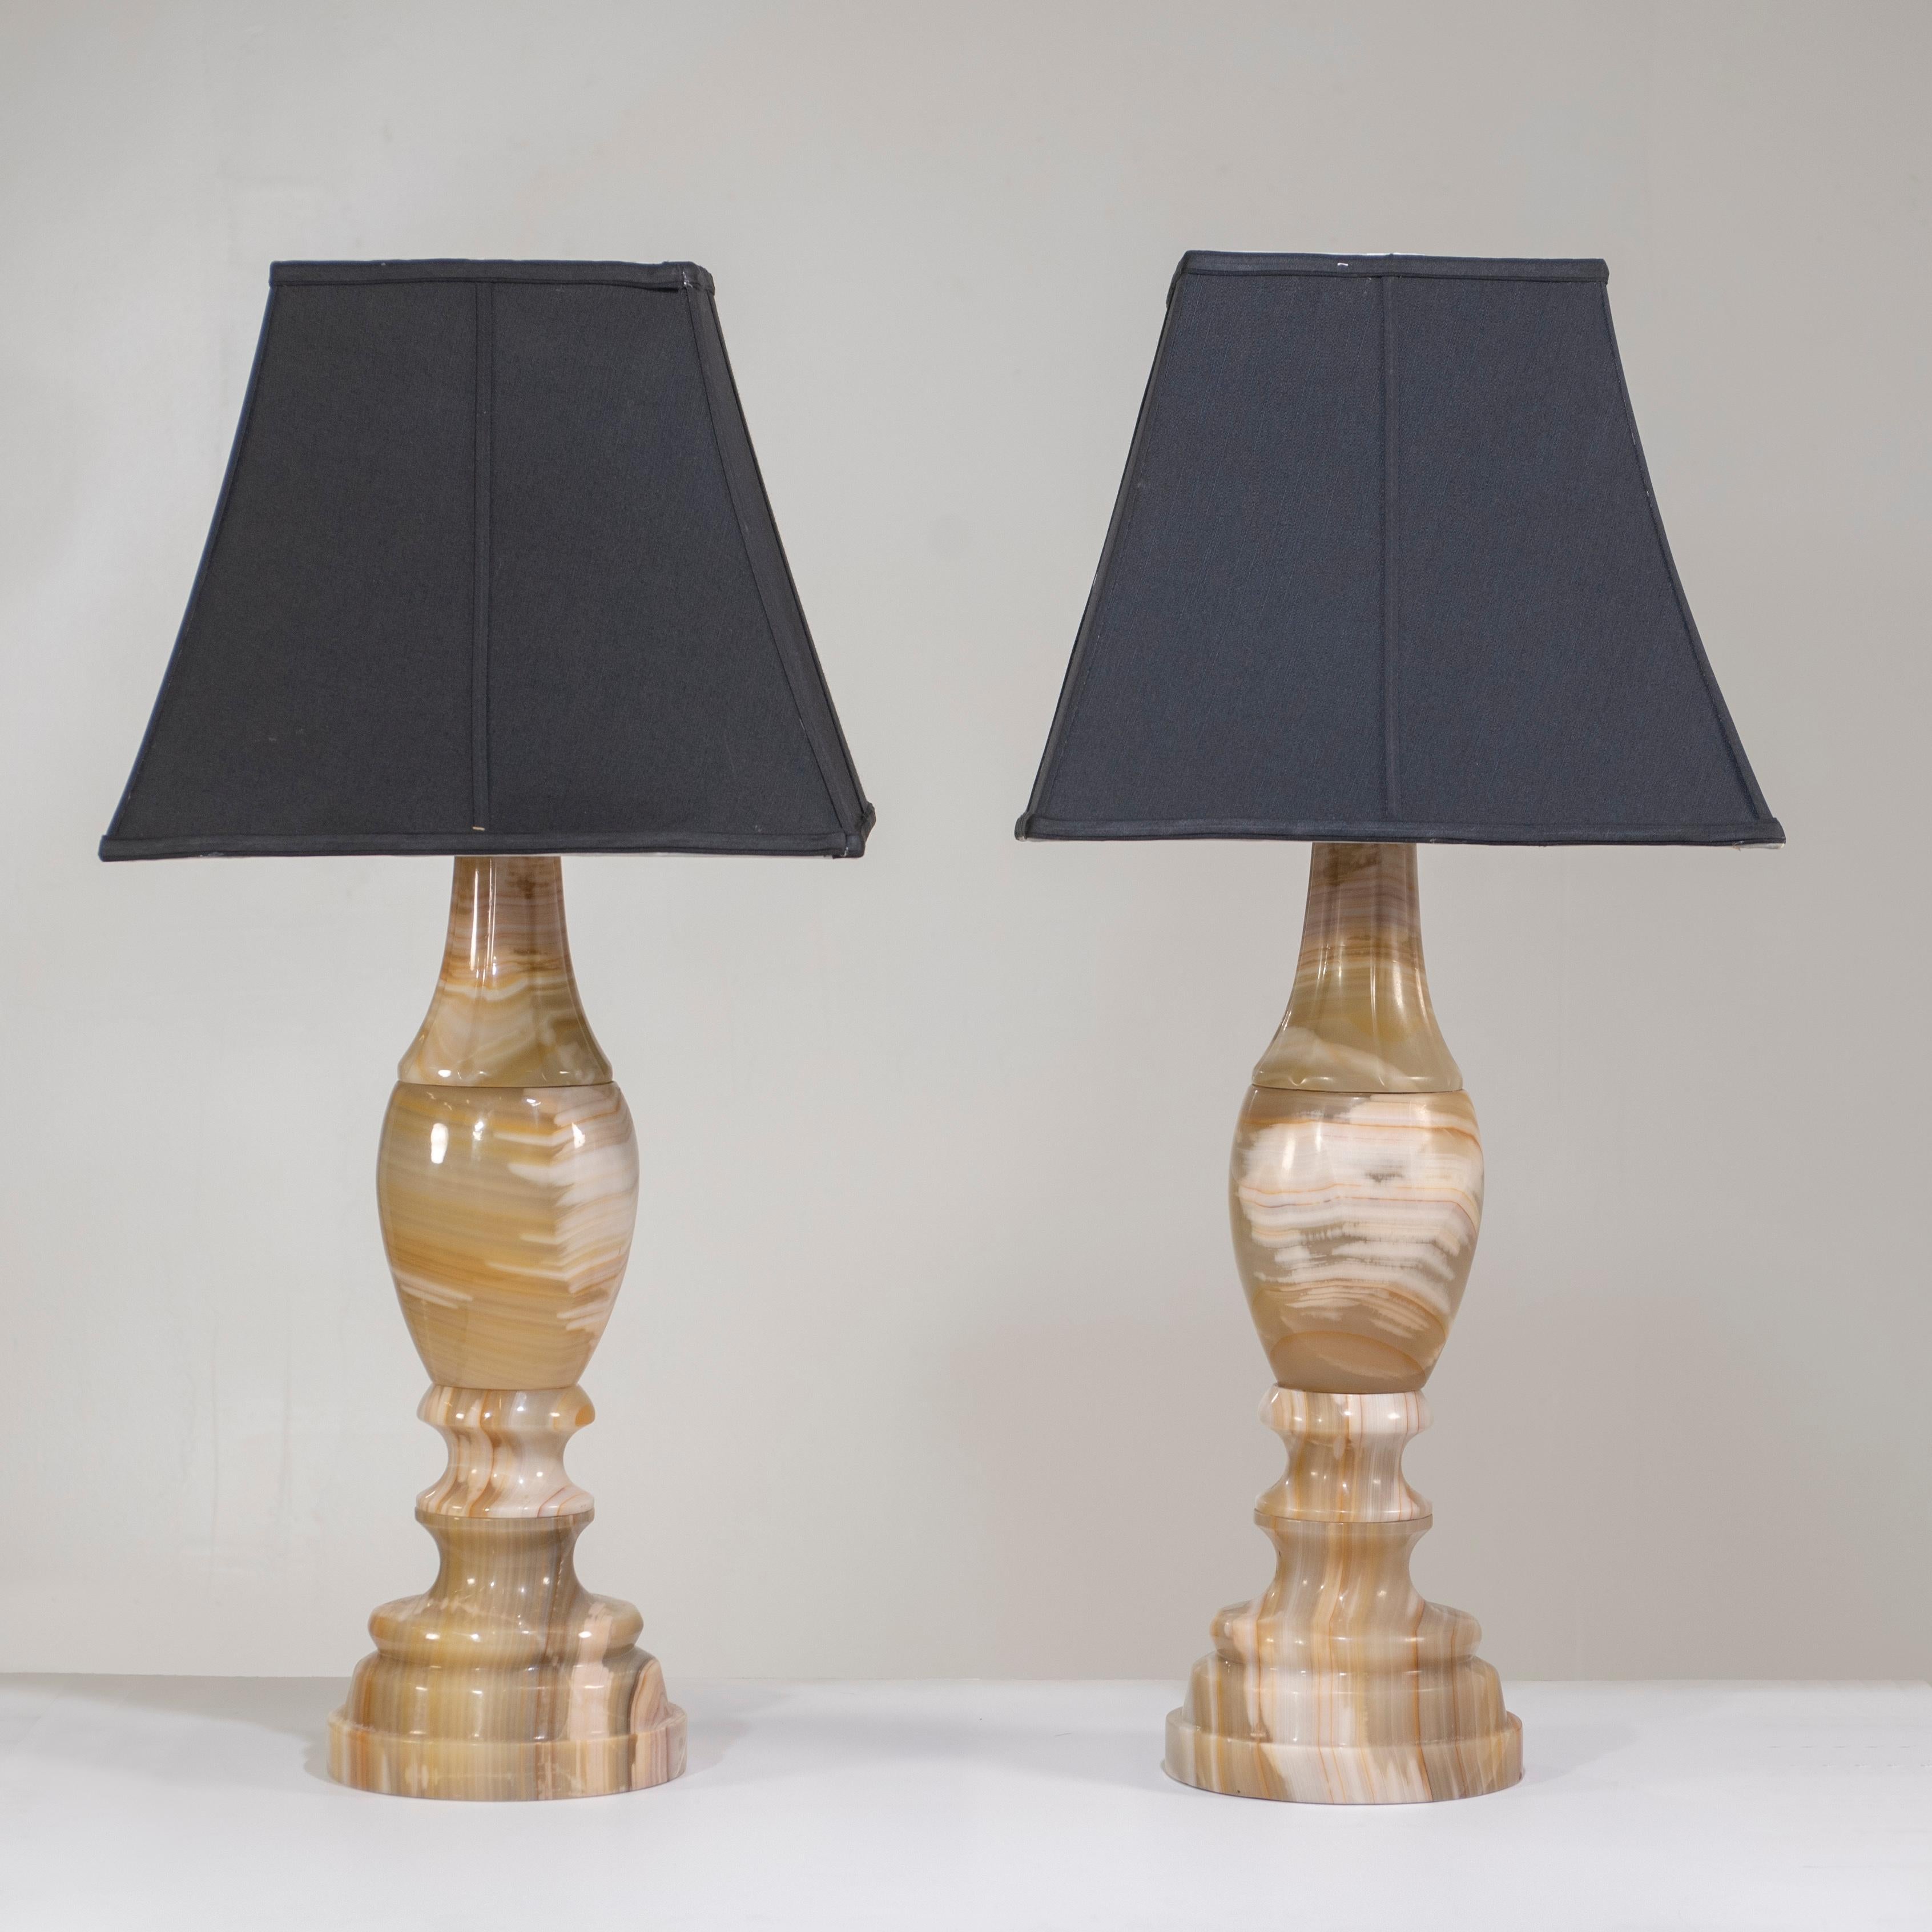 A pair of impressively large scale onyx table lamps with gorgeous coloration and heft. The lampshades and harps are not included.